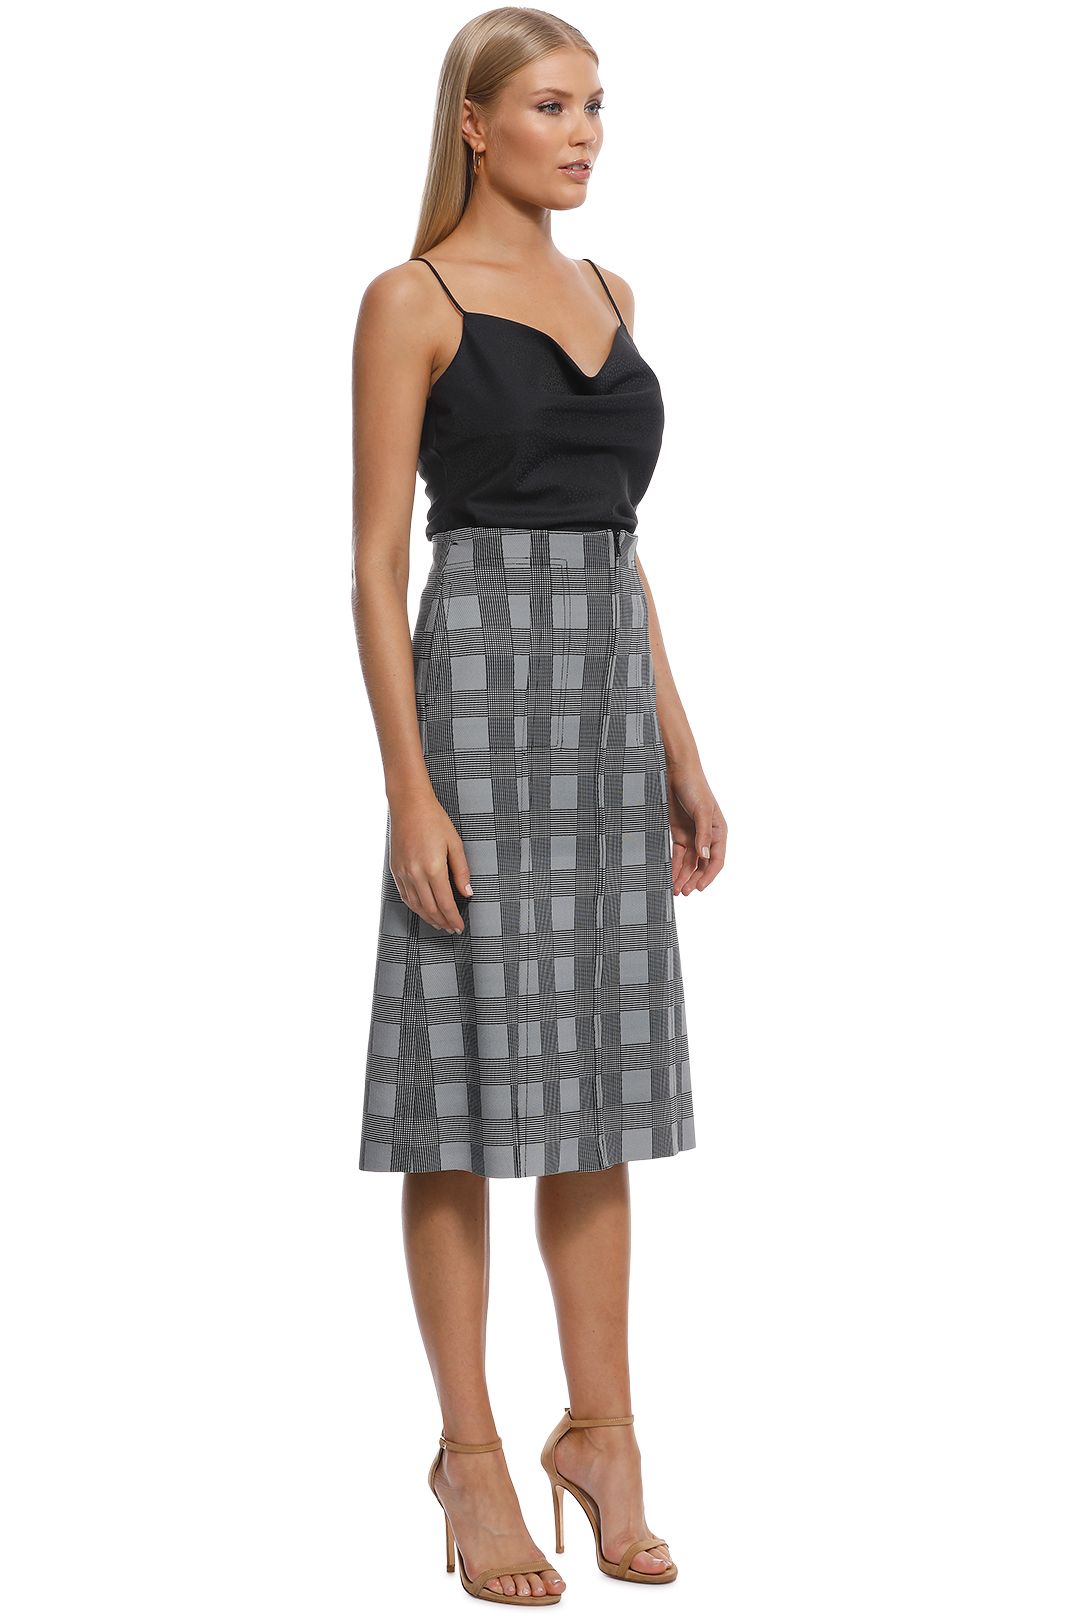 Scanlan Theodore - Scuba Prince of Wales Skirt - Check - Side